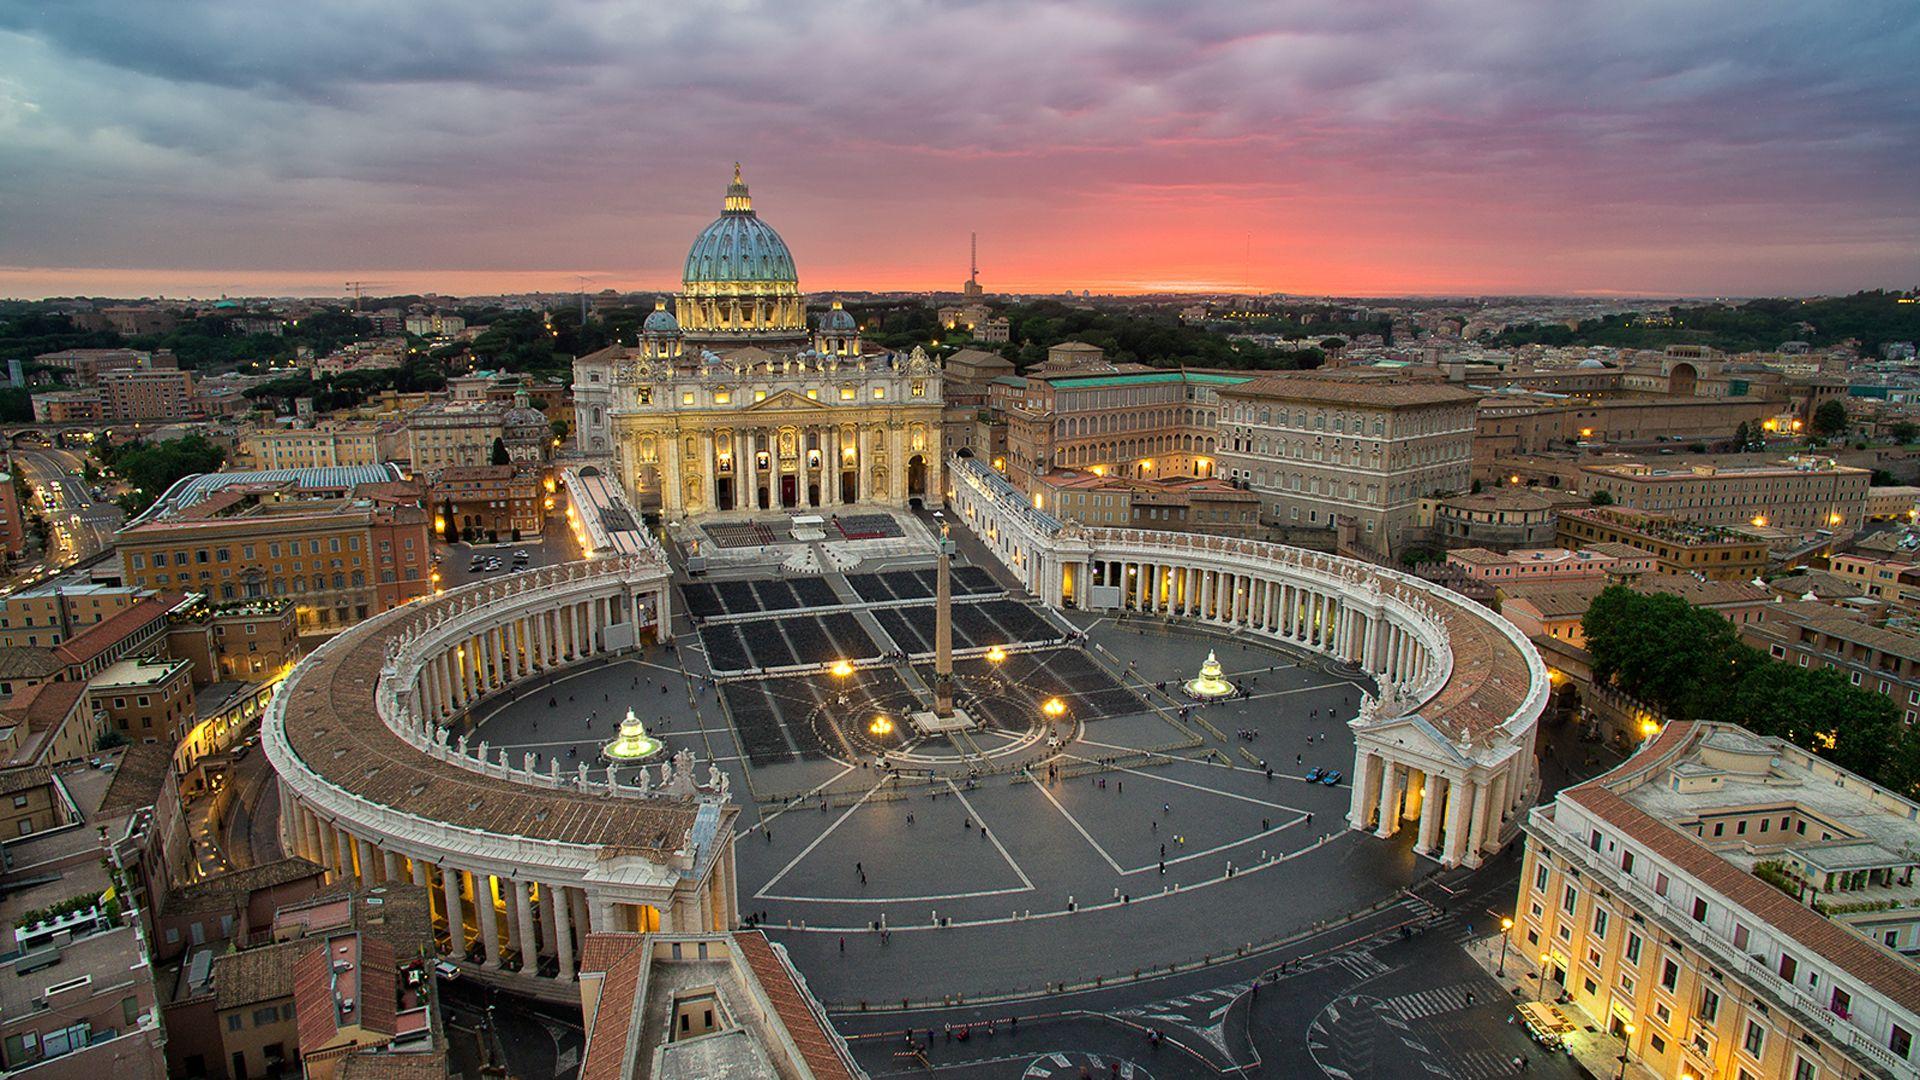 Vatican City, A City State Surrounded By Rome, Italy, Is The